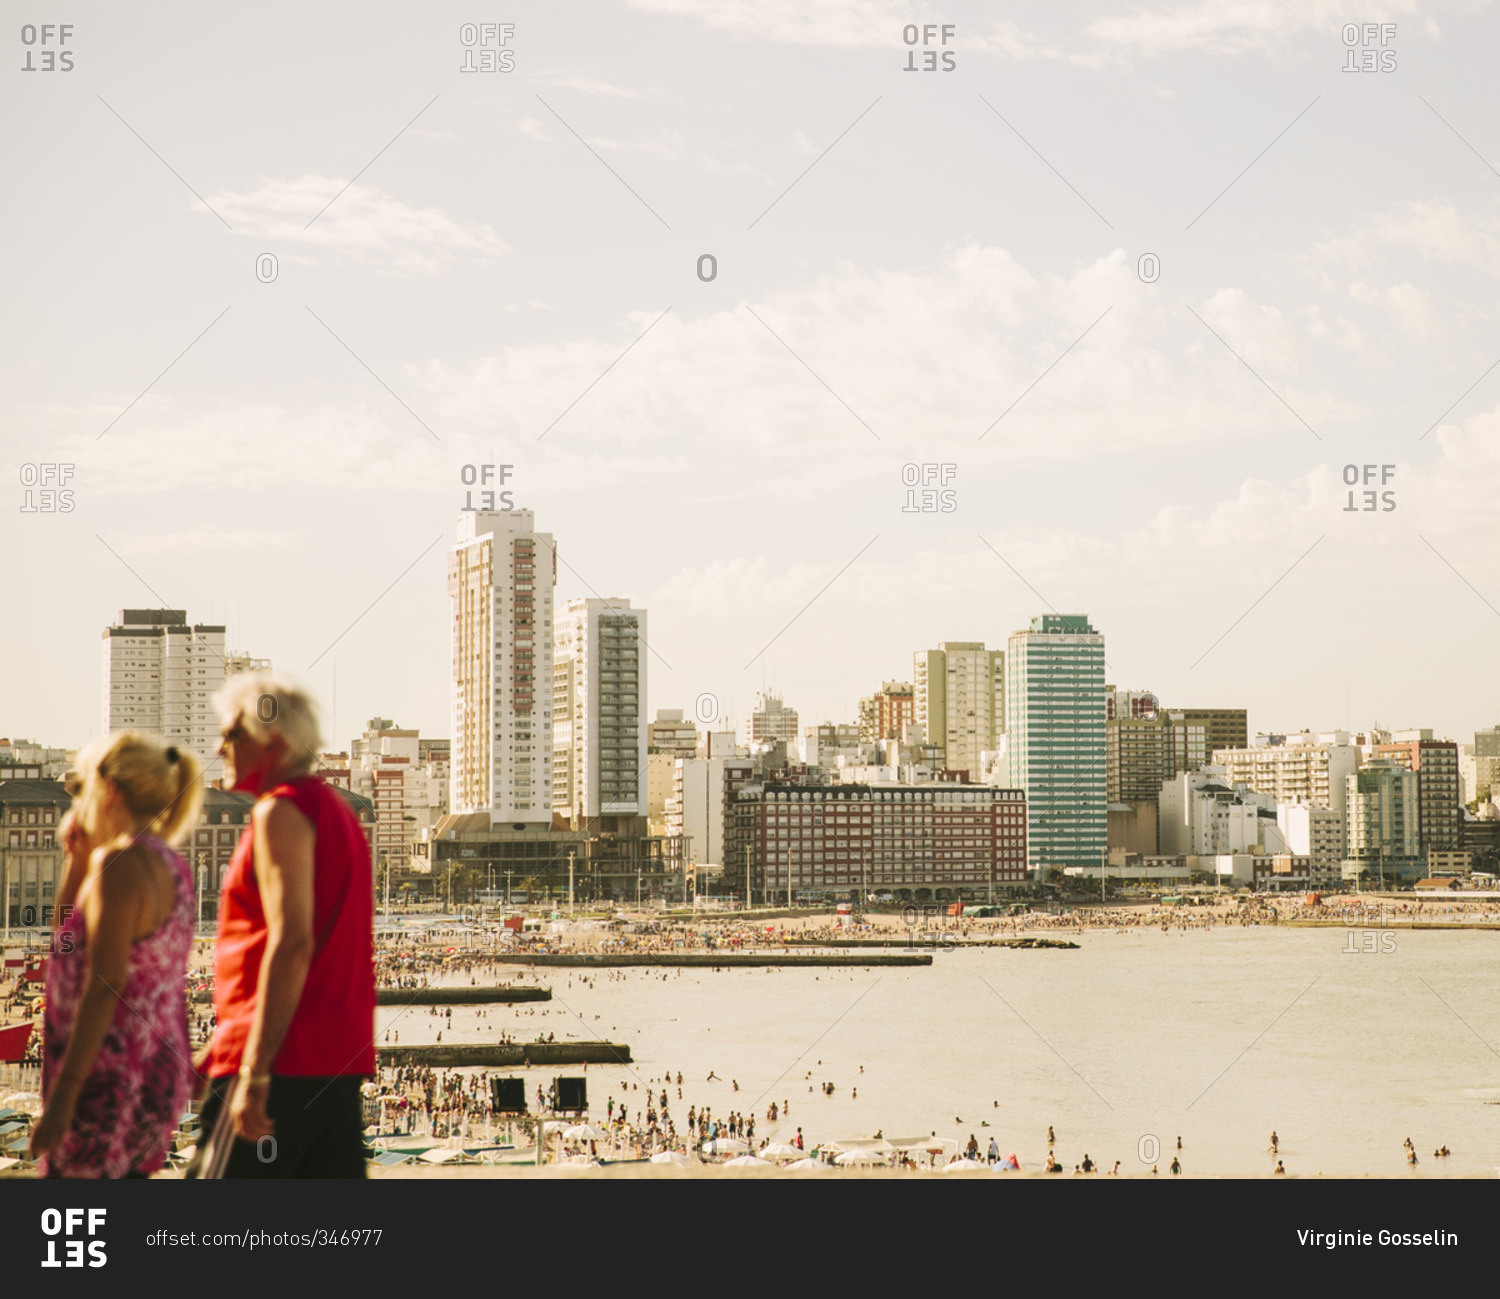 Crowded beach in front of a city skyline